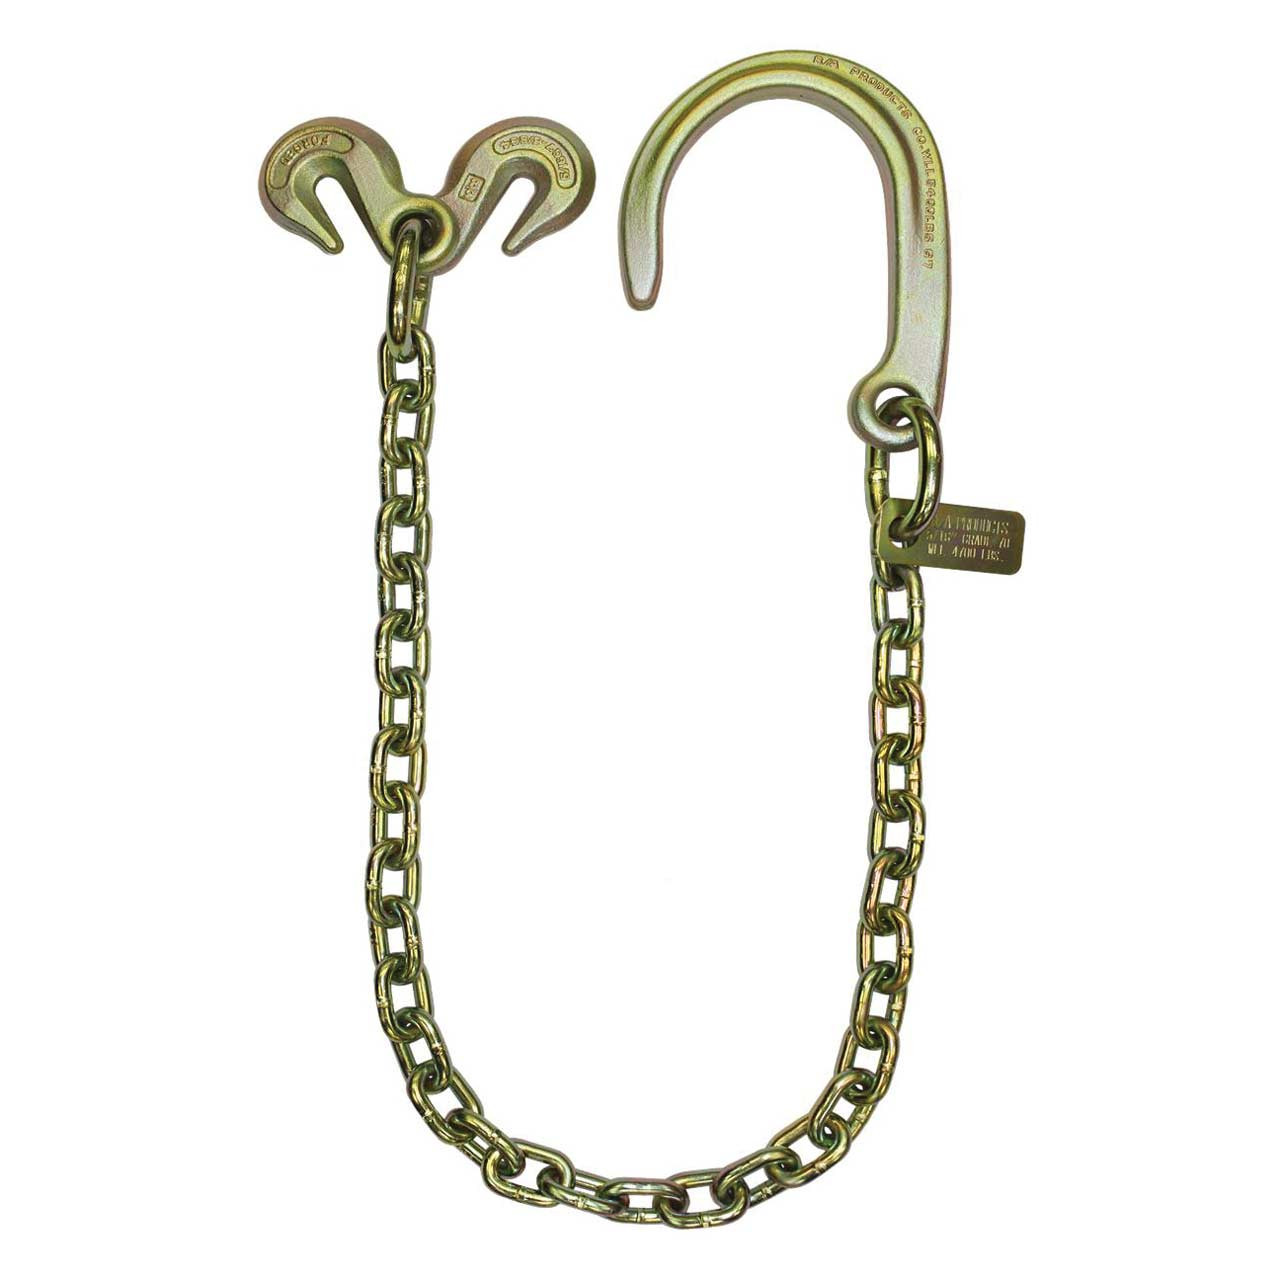 B/A Products Axle Chain - 3-ft. Chain with 8inch J-Hook and 2 Grab Hooks, Model N711-AC3